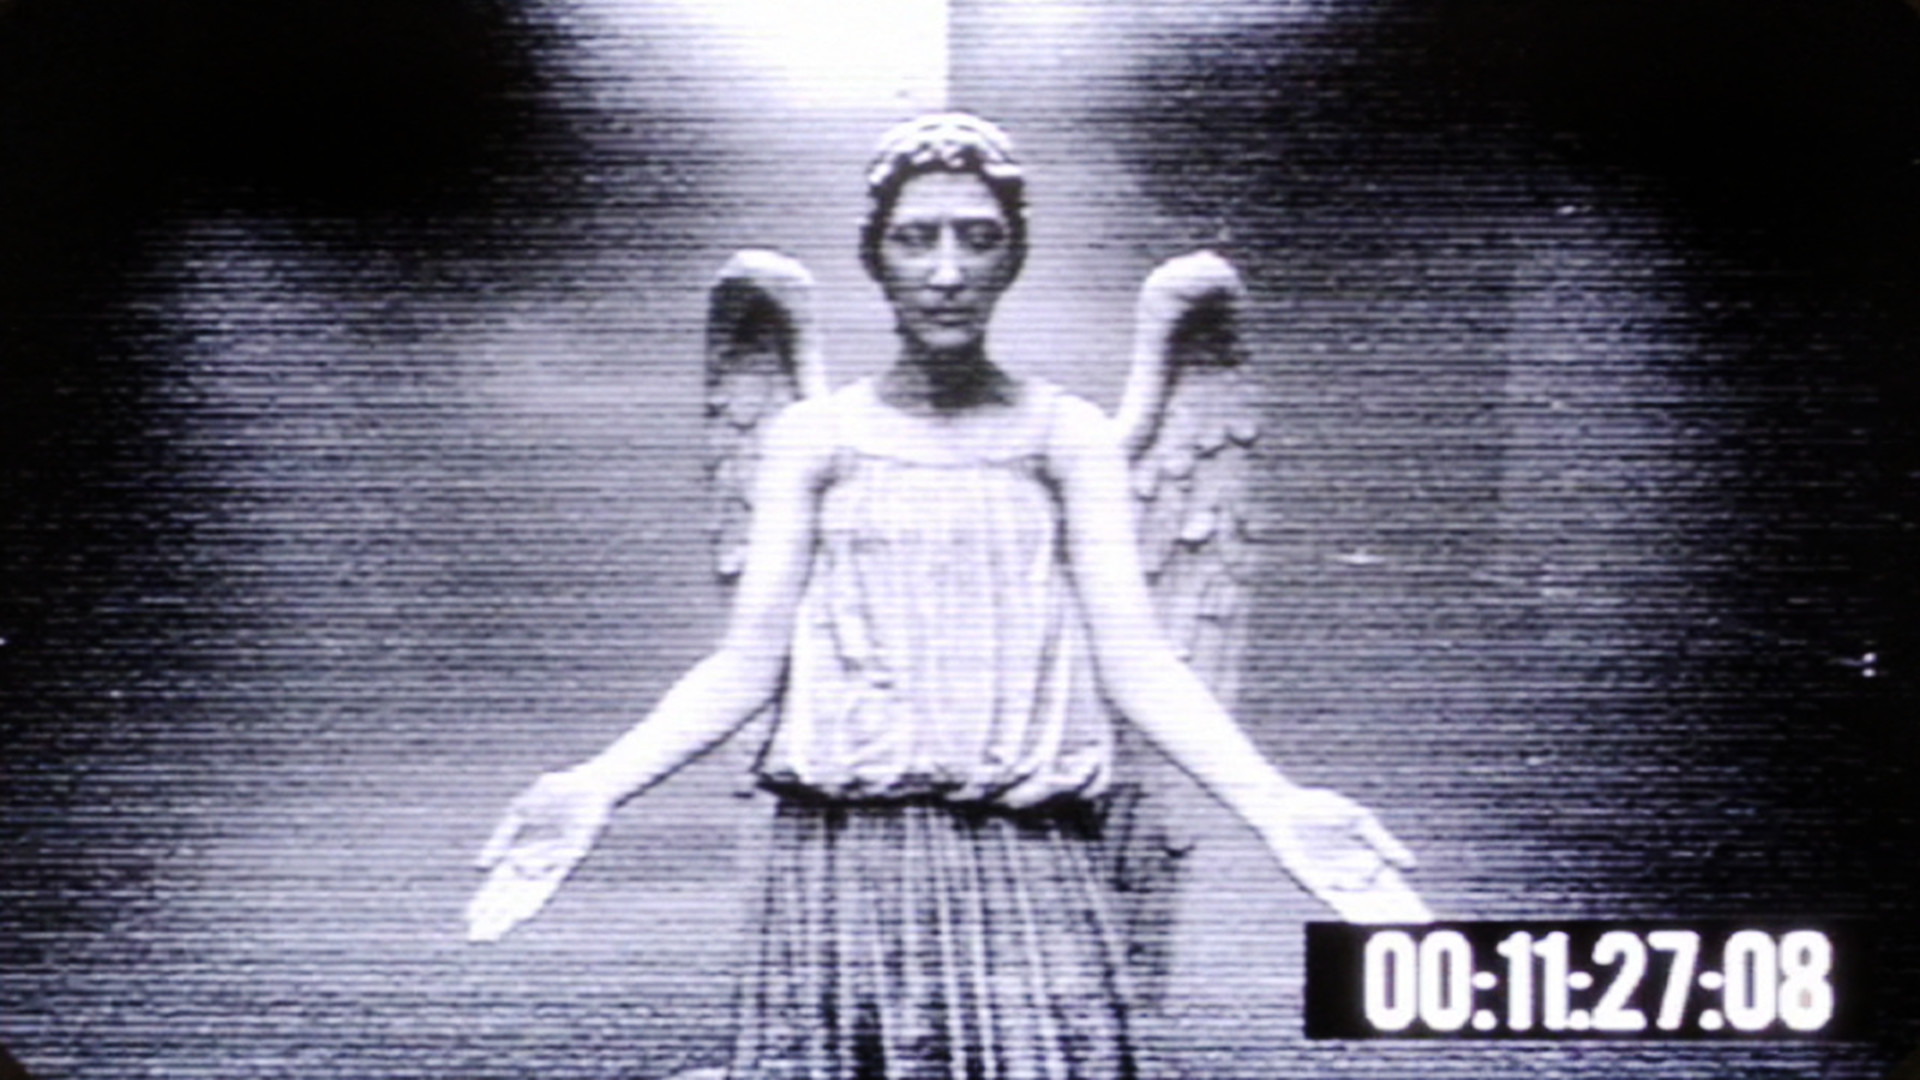 weeping angel wallpaper,fashion,album cover,photography,black and white,gesture